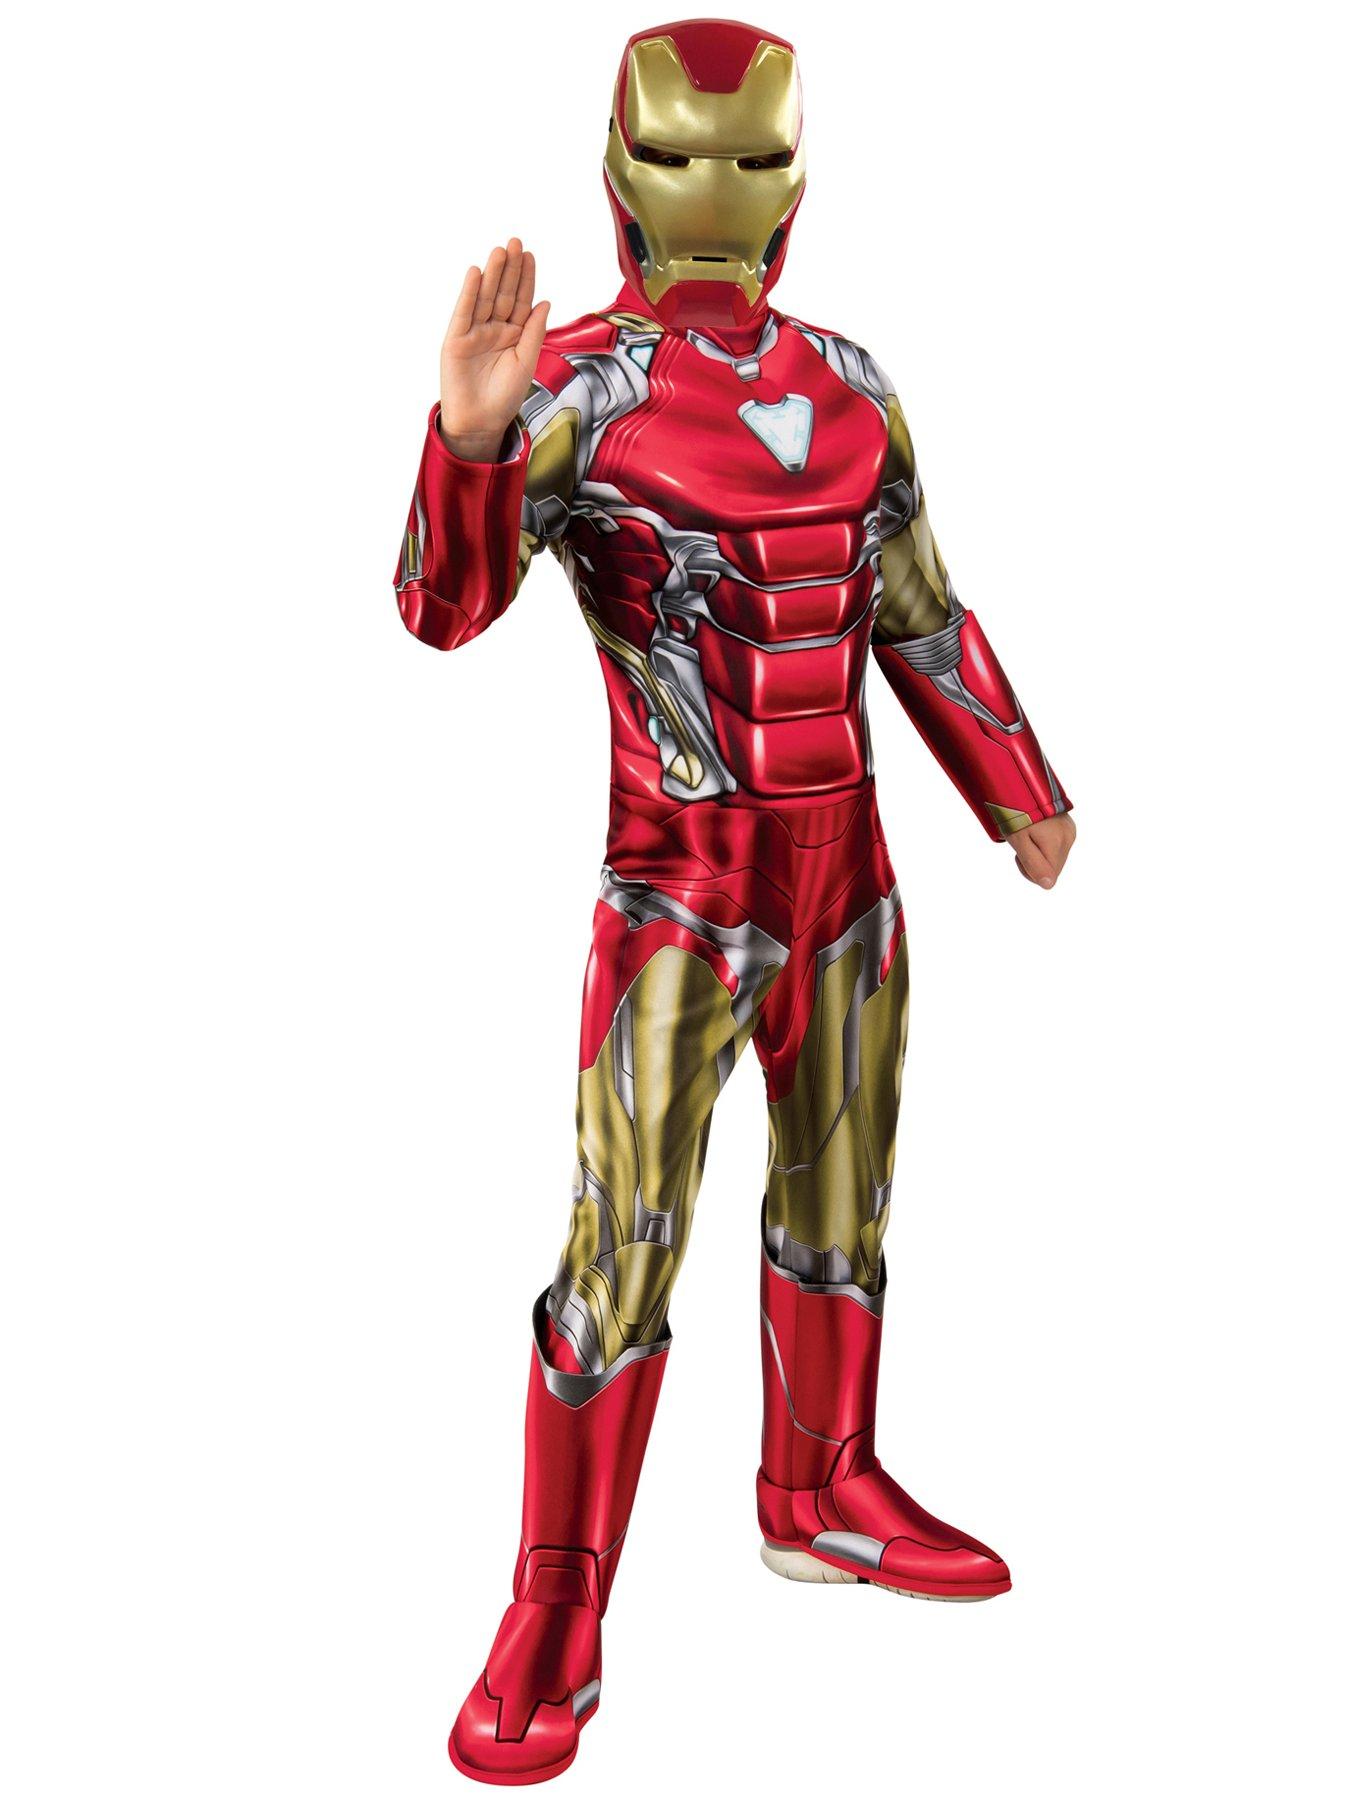 Marvel Universe Child Iron Man Muscle Chest T-Shirt and Mask 8-10